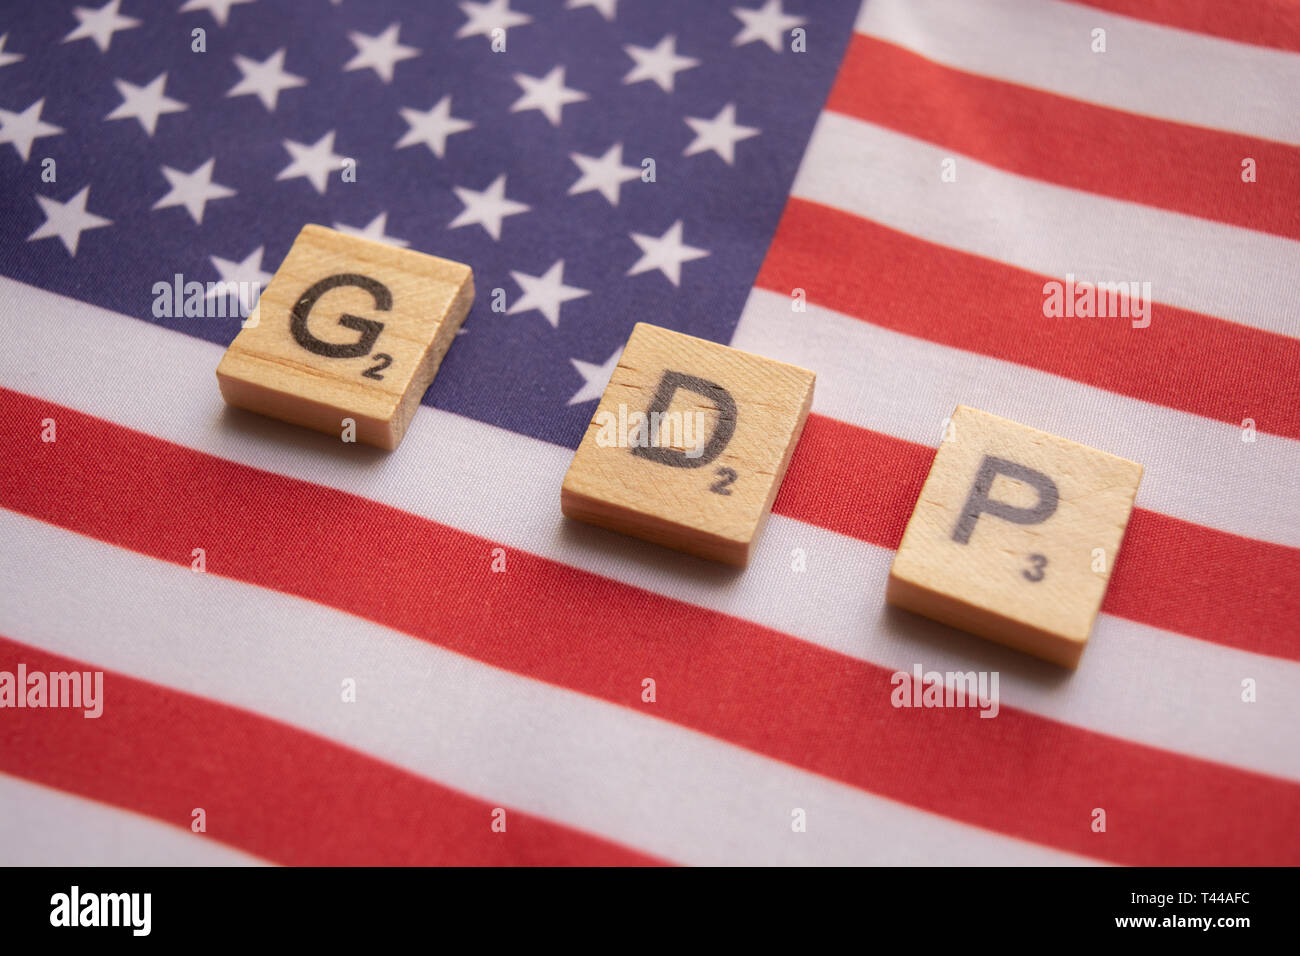 Finance Concept, GDP or Gross domestic product wooden block letters on US Dollar flag. Stock Photo